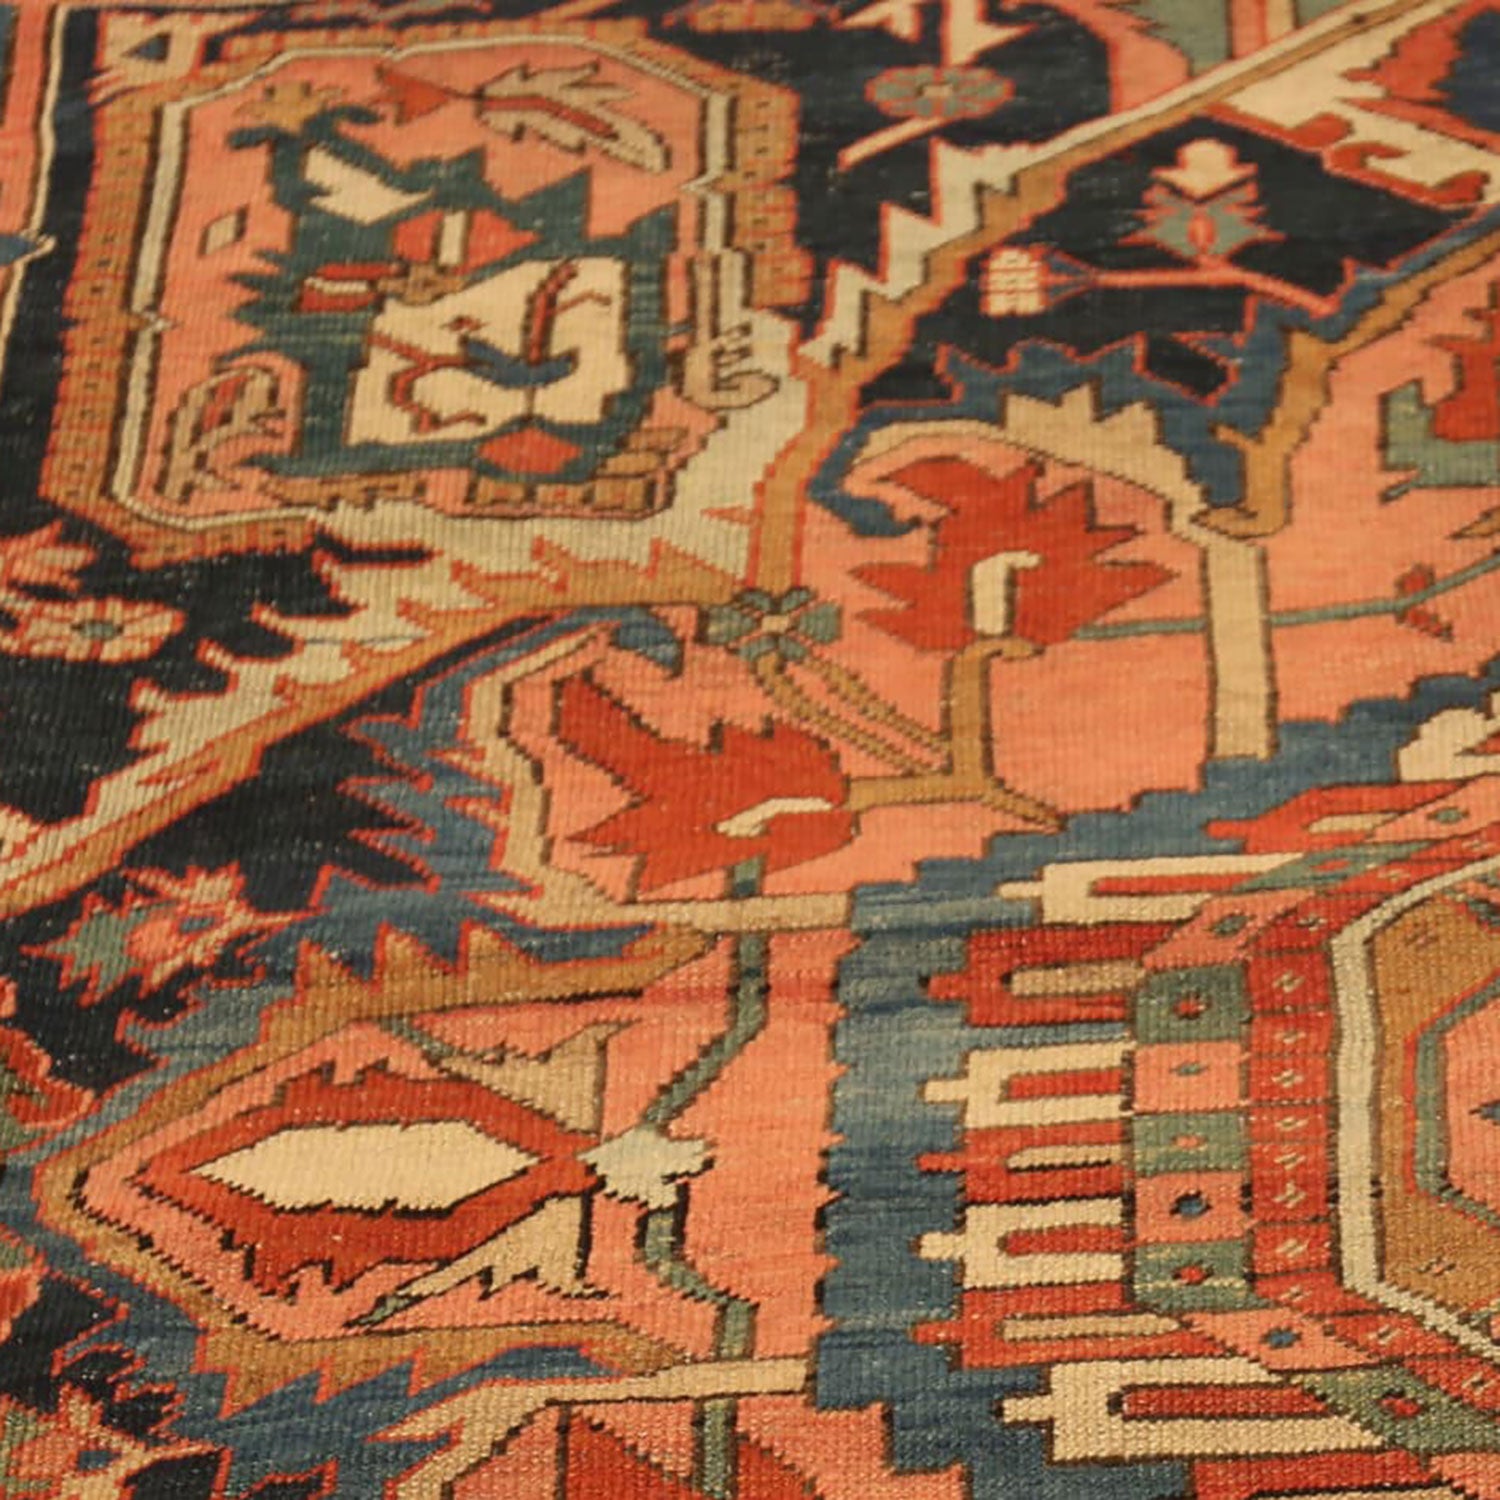 Close-up of a handwoven intricate patterned rug in vibrant colors.